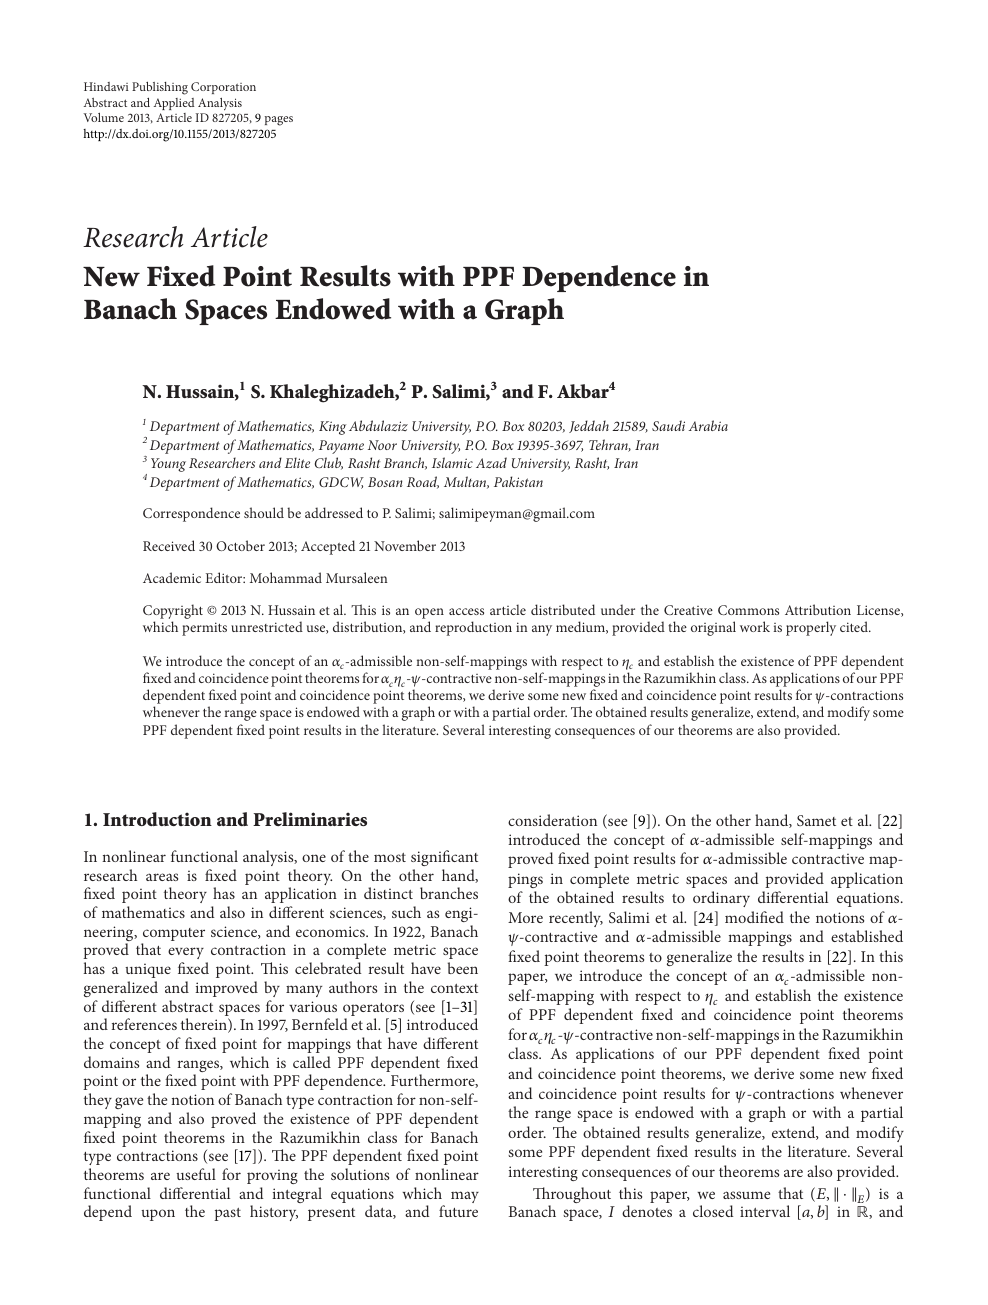 New Fixed Point Results With Ppf Dependence In Banach Spaces Endowed With A Graph Topic Of Research Paper In Mathematics Download Scholarly Article Pdf And Read For Free On Cyberleninka Open